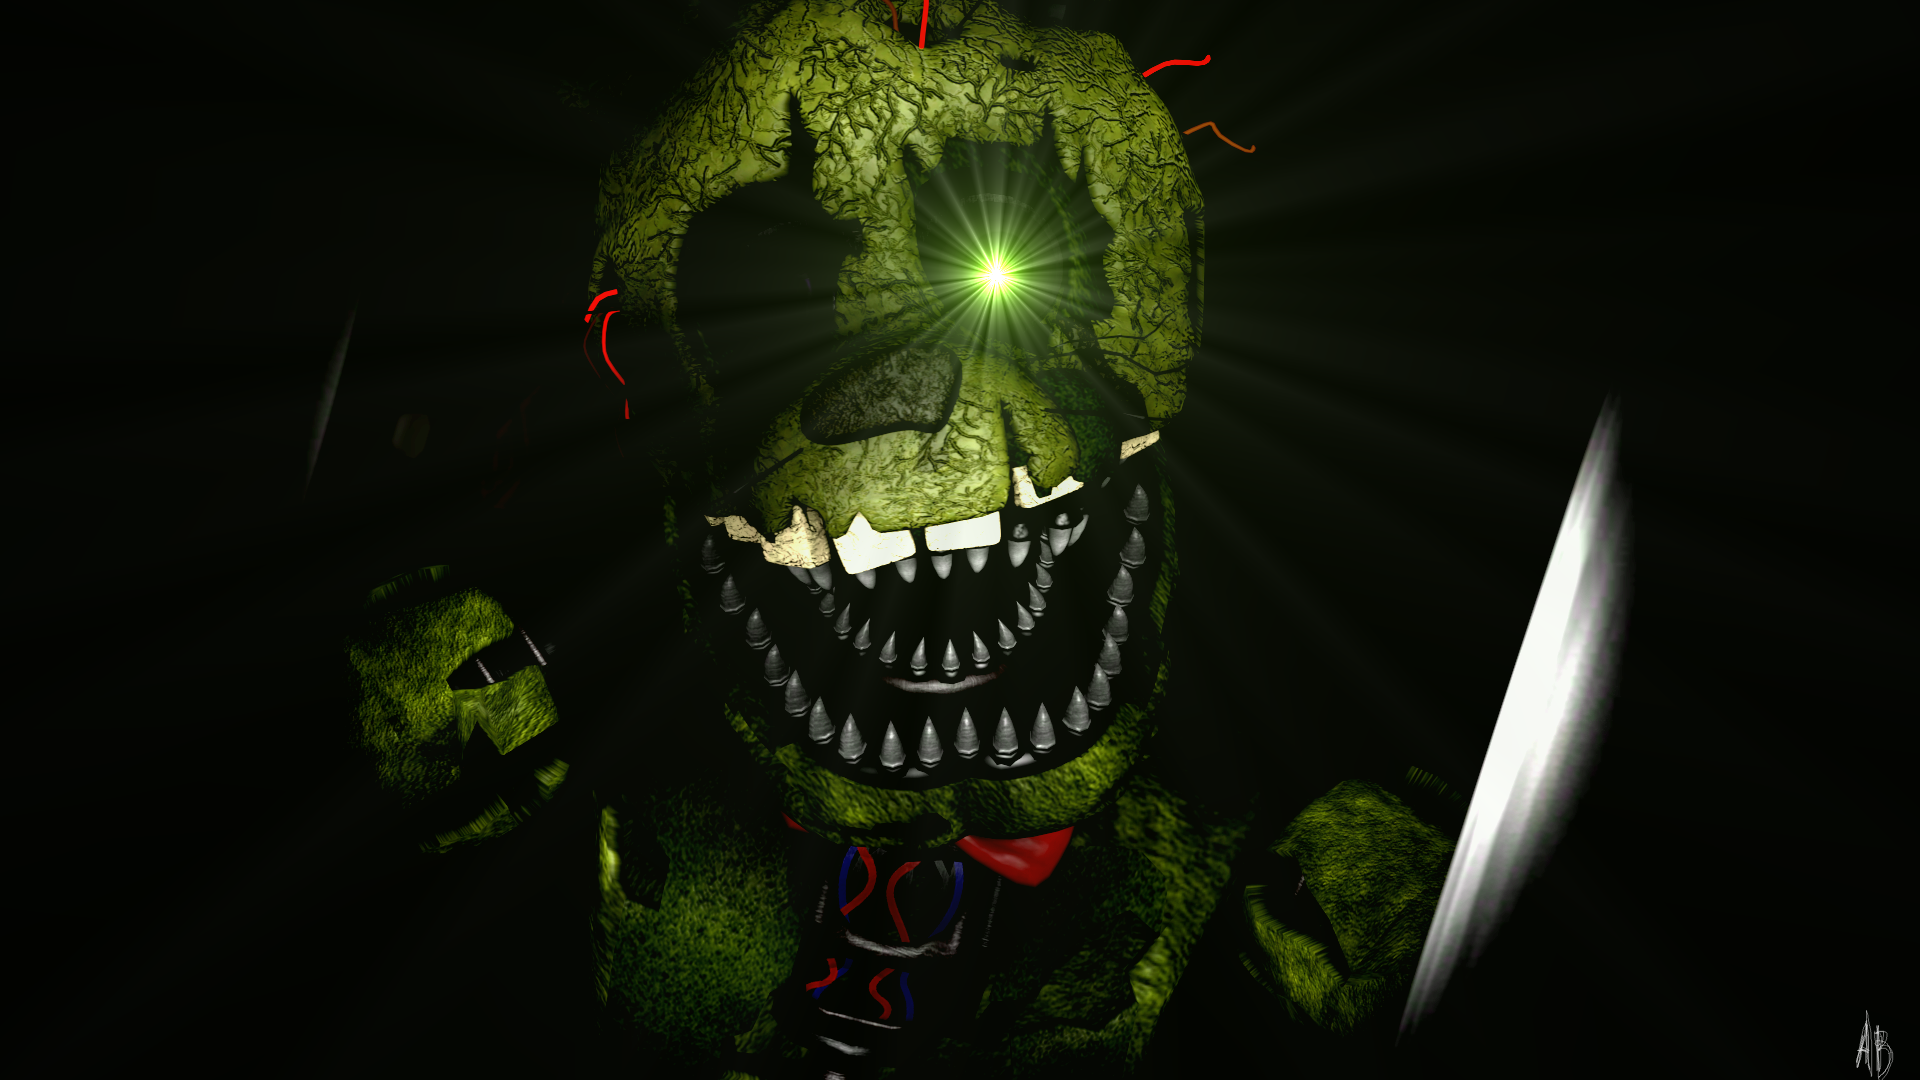 Video Game Five Nights At Freddy 039 S 3 Wallpaper - Resolution